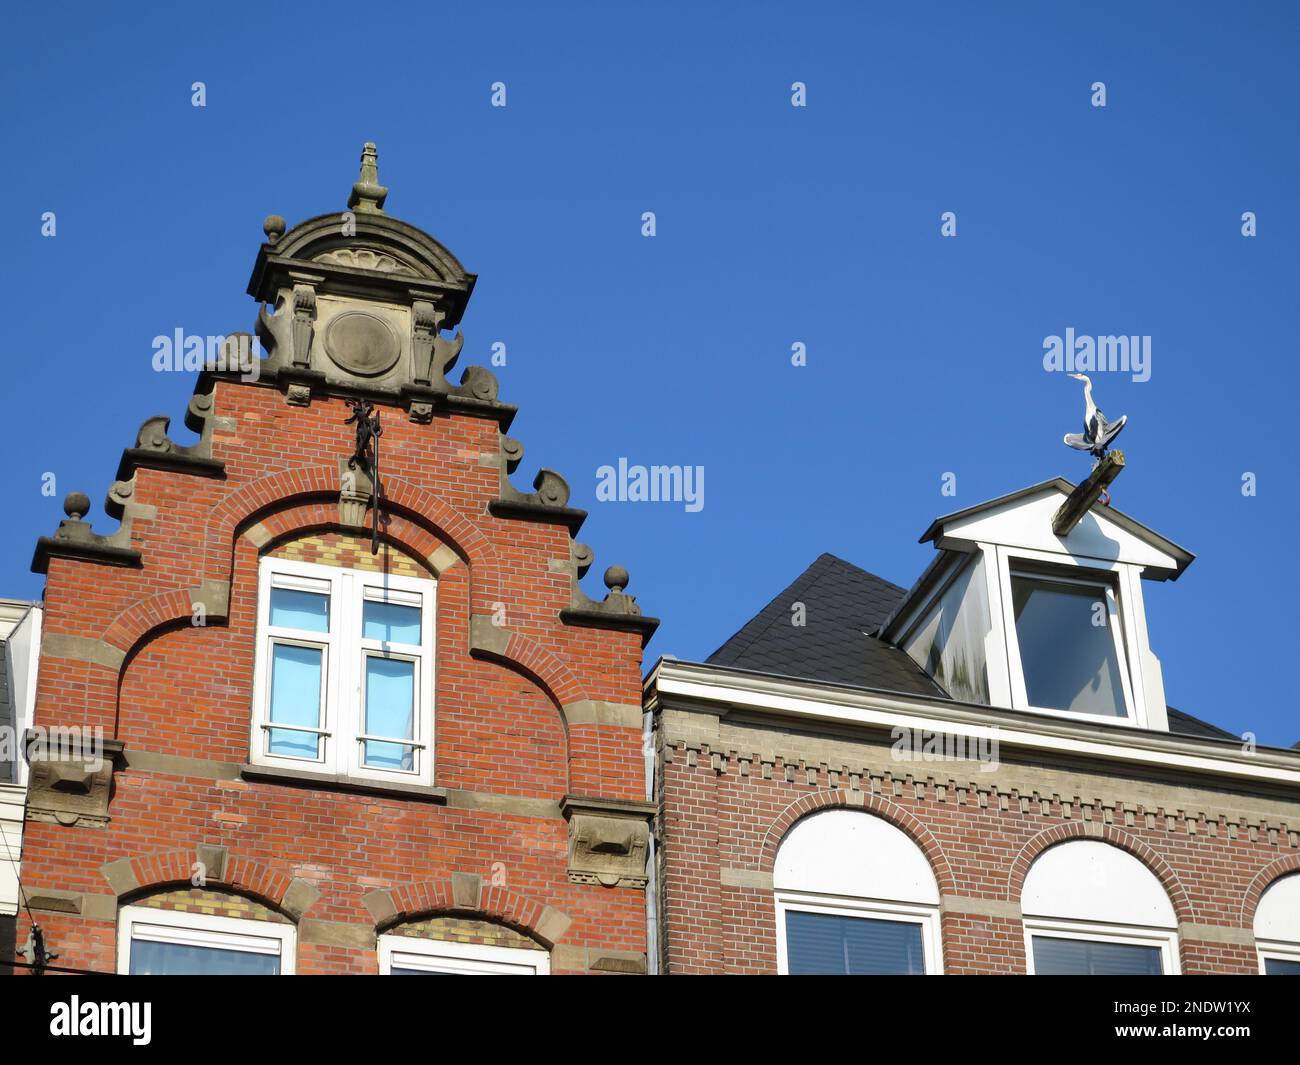 A single Grey Heron (Ardea cinerea) sitting on a moving hook beam at the top of a house. Taken in Amsterdam, Netherlands. Stock Photo